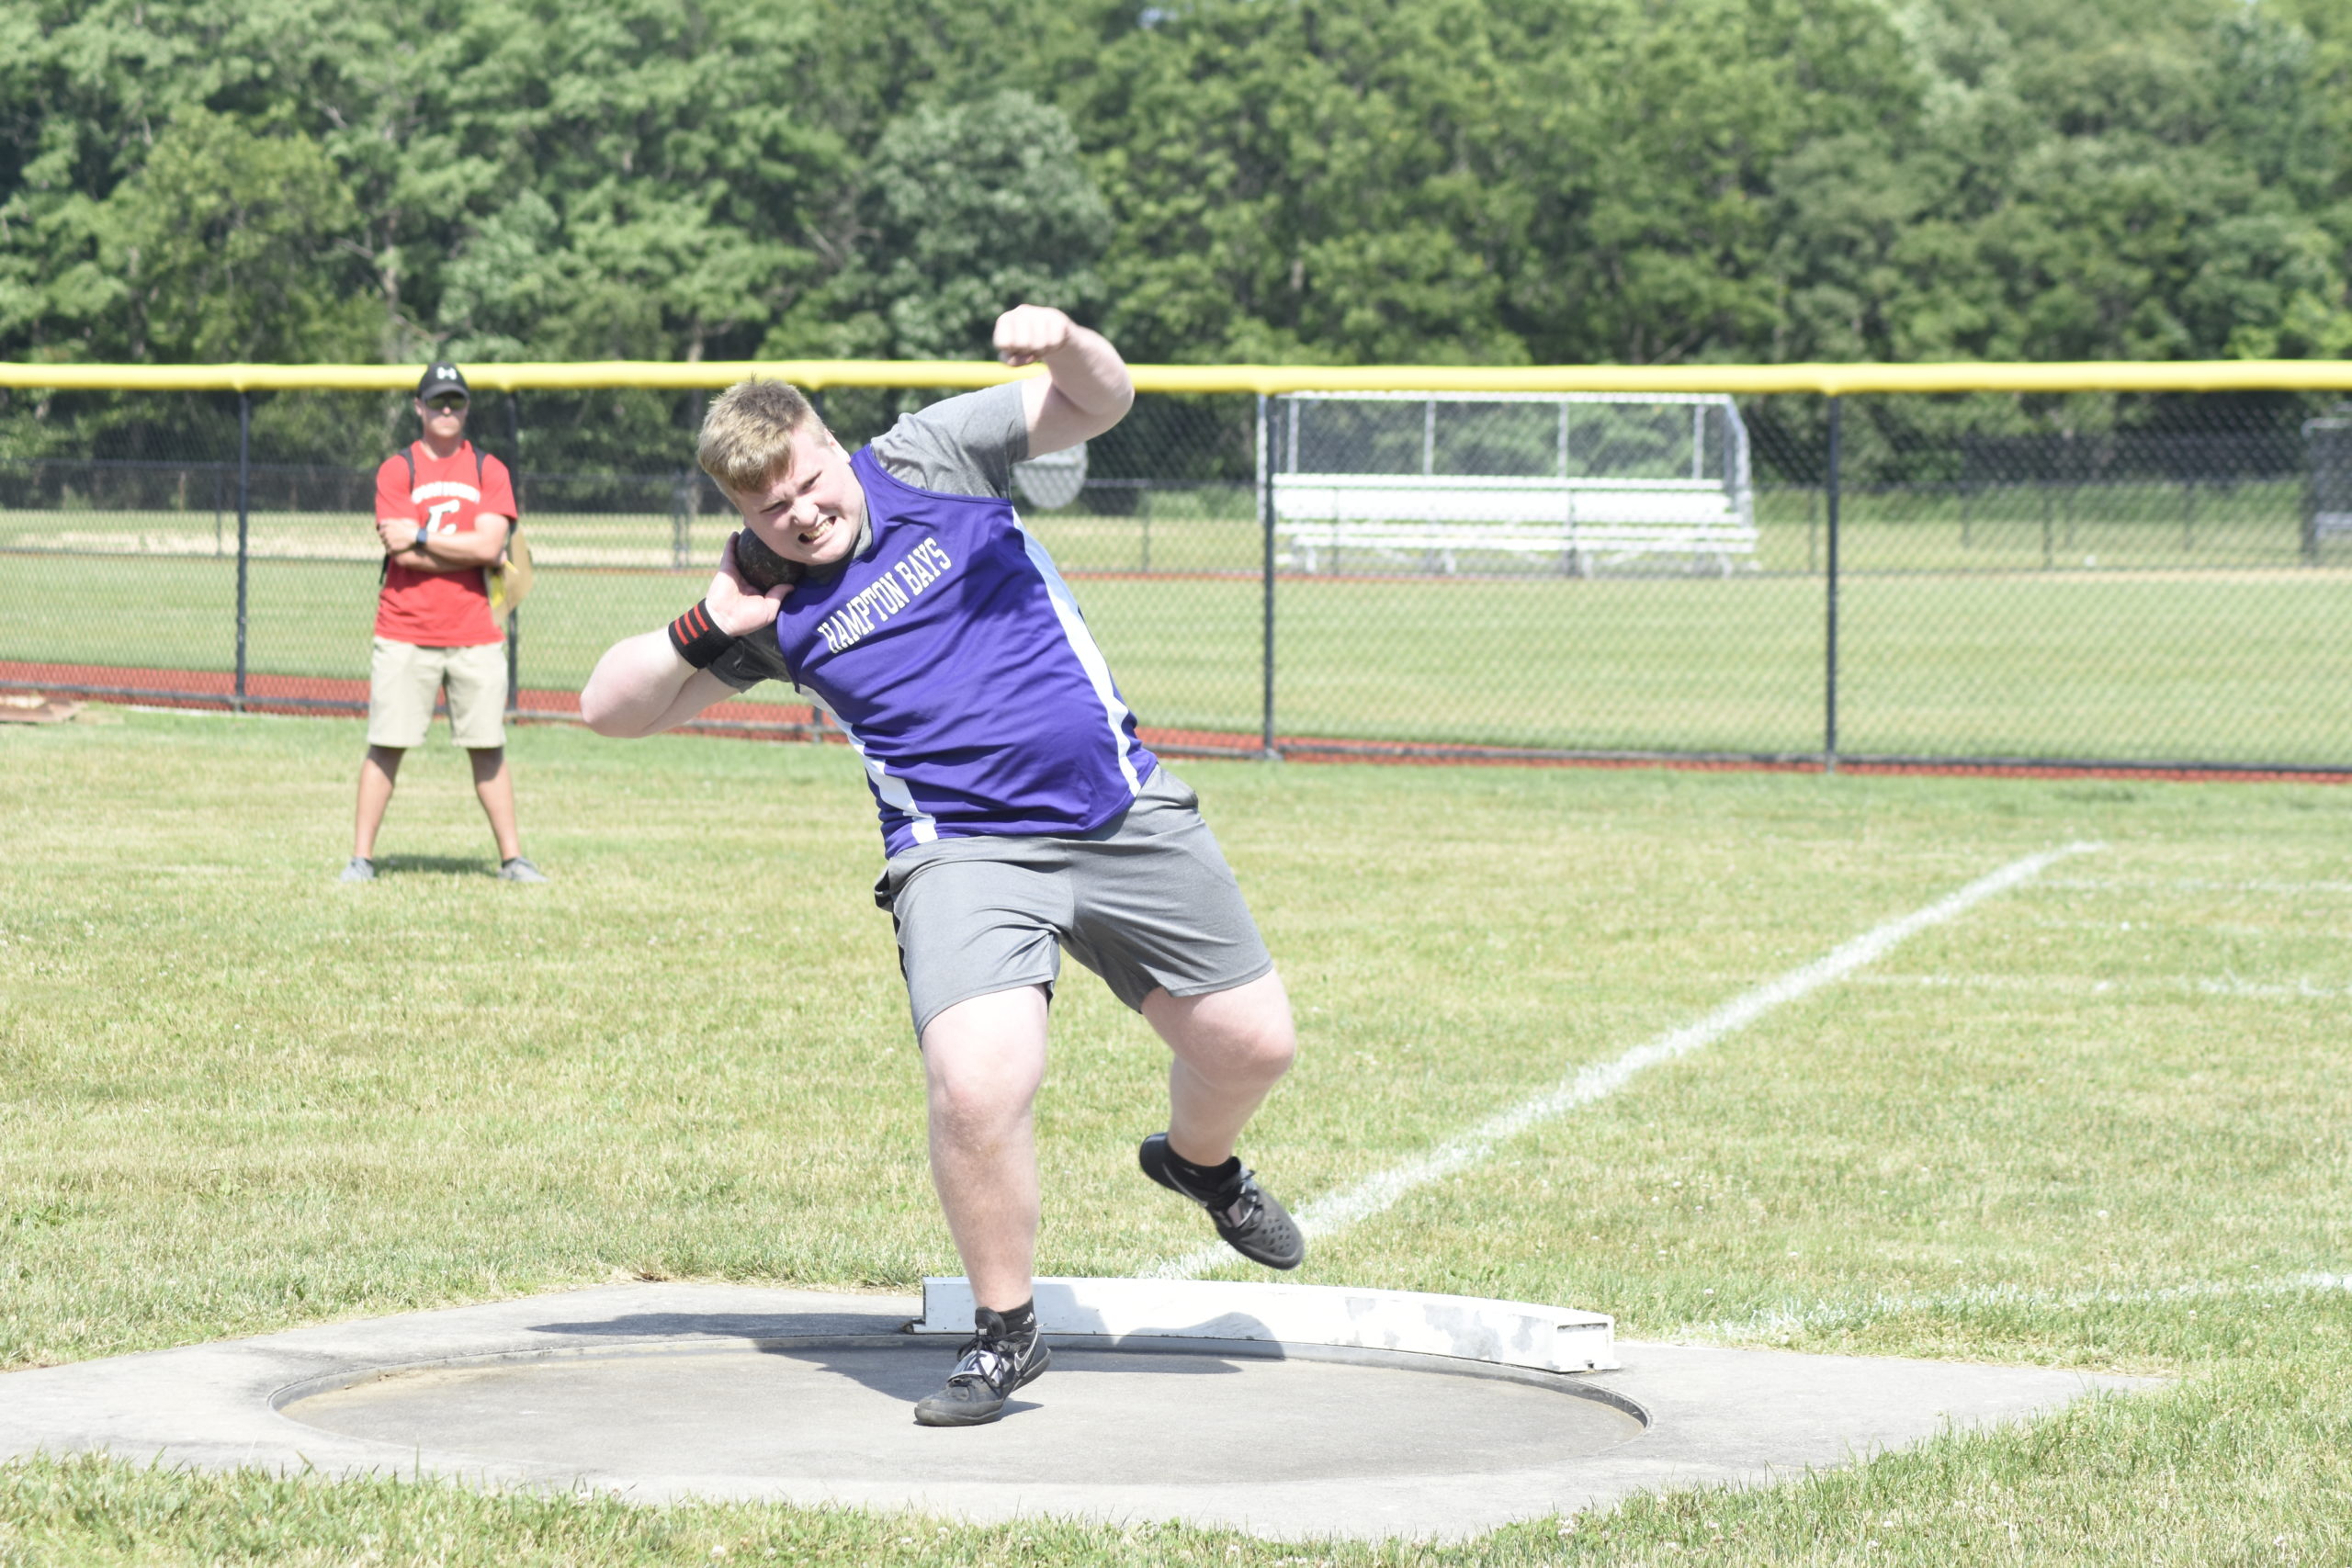 Hampton Bays junior Timothy Kraycar finished 11th in the shot put at the Section XI boys track championships on Friday.